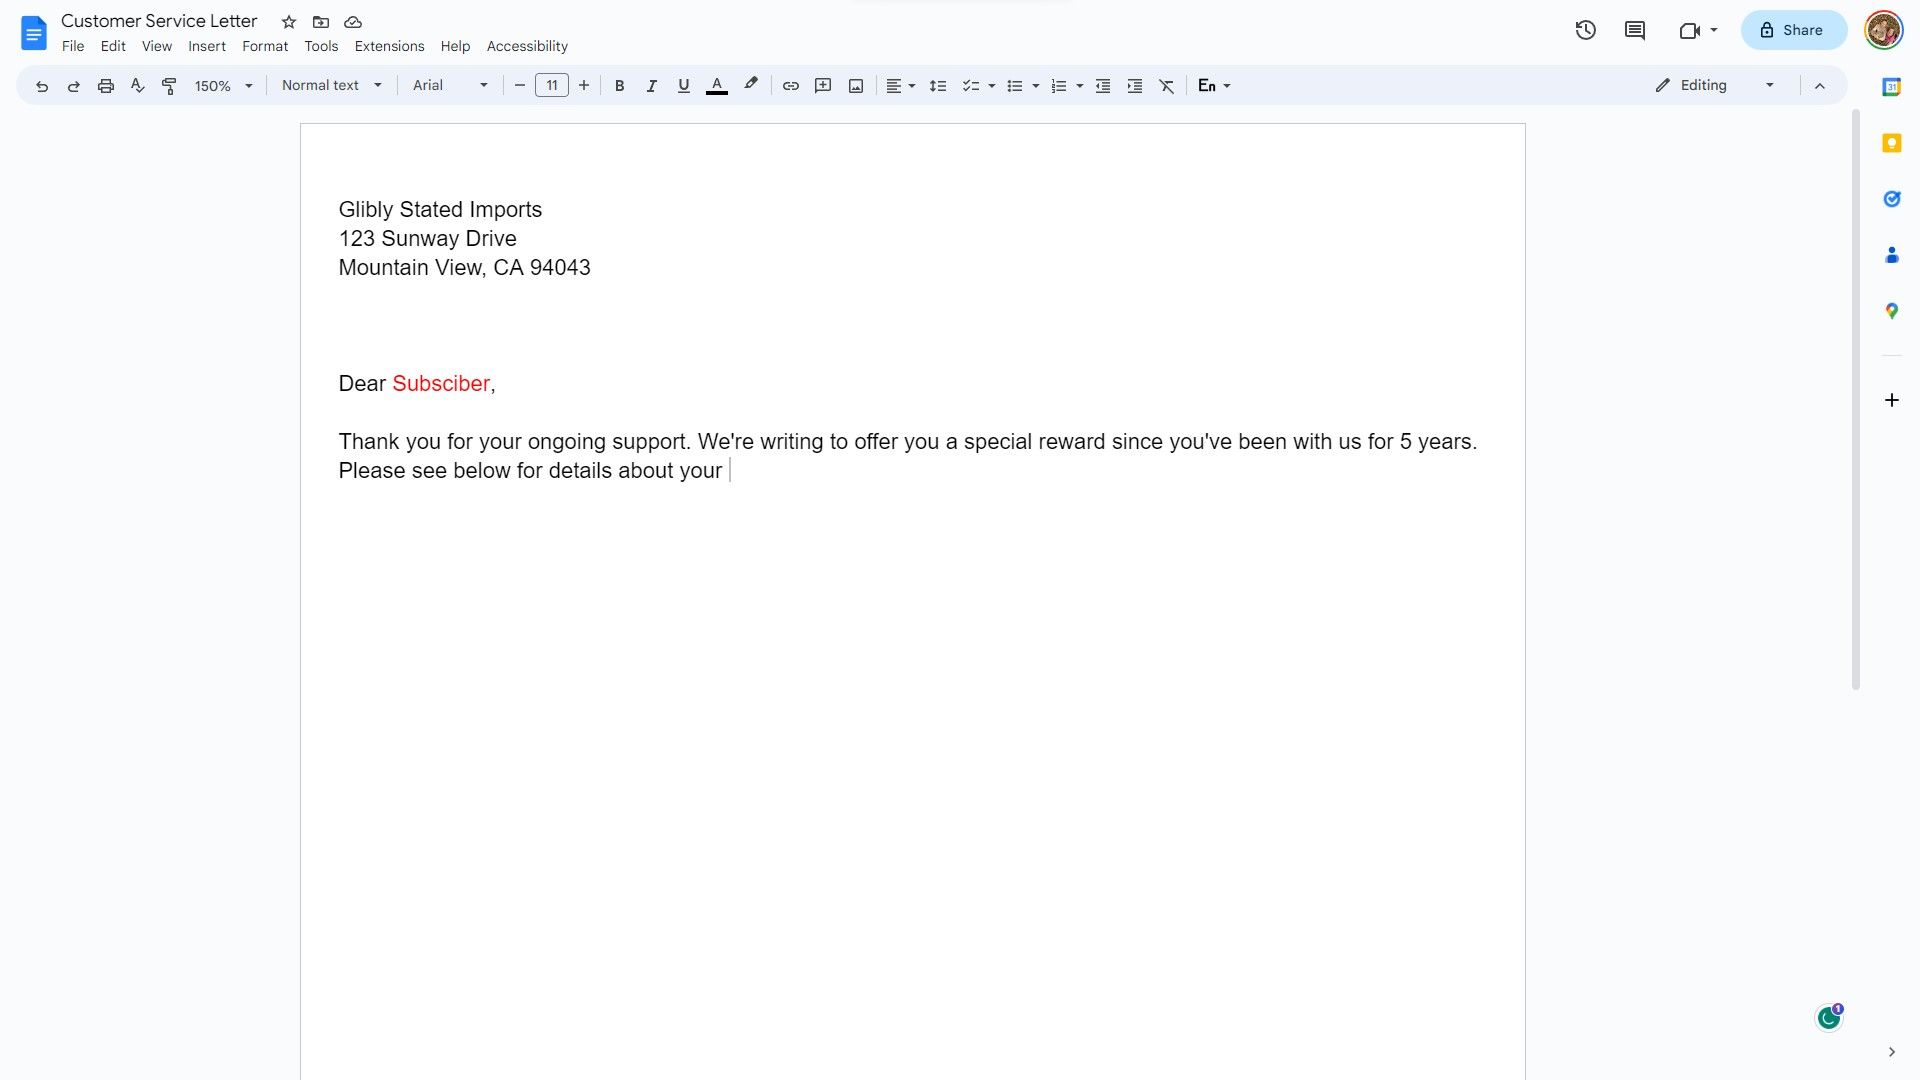 A screenshot of a Google Docs document with a typo highlighted in red.